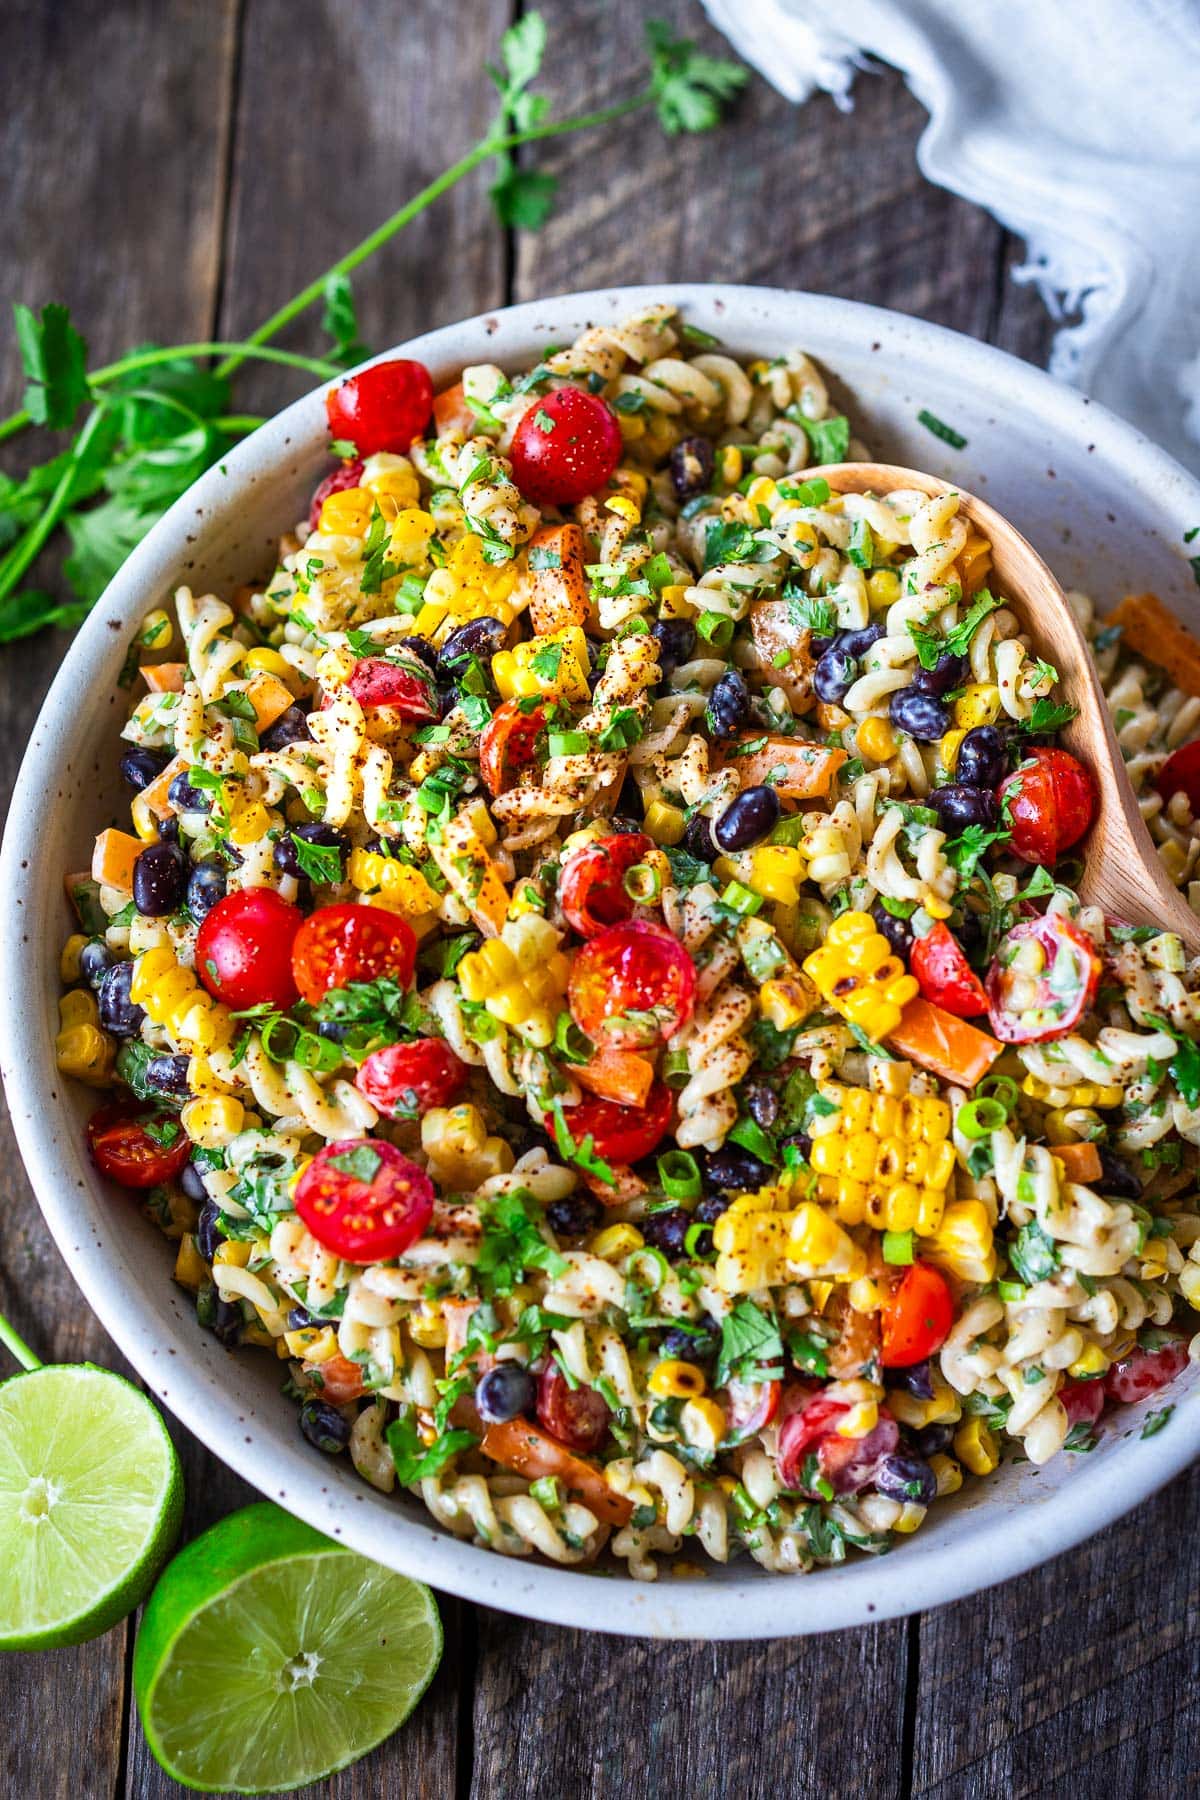 Southwest Pasta Salad is so satisfying with just the right amount of zesty kick. Tender pasta, crunchy fresh veggies, corn, and black beans dressed with a delicious Chipotle Ranch Dressing. The perfect side dish for potlucks, cookouts, and BBQS.